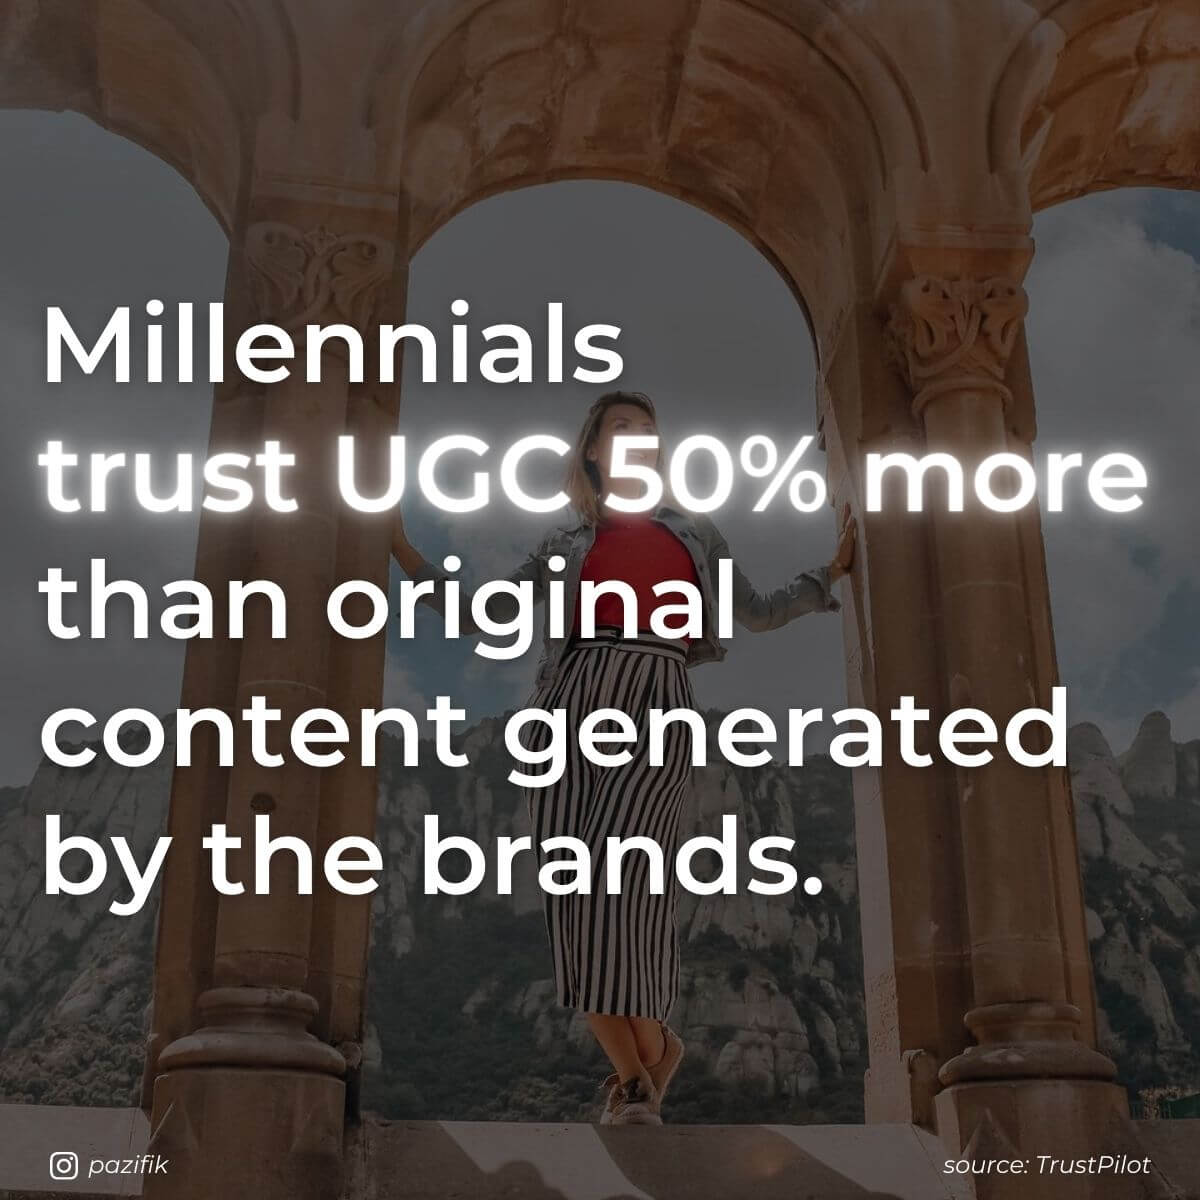 Hospitality Marketing Strategy Quote: Millennials trust UGC 50% more than original content generated by the brands. (TrustPilot)